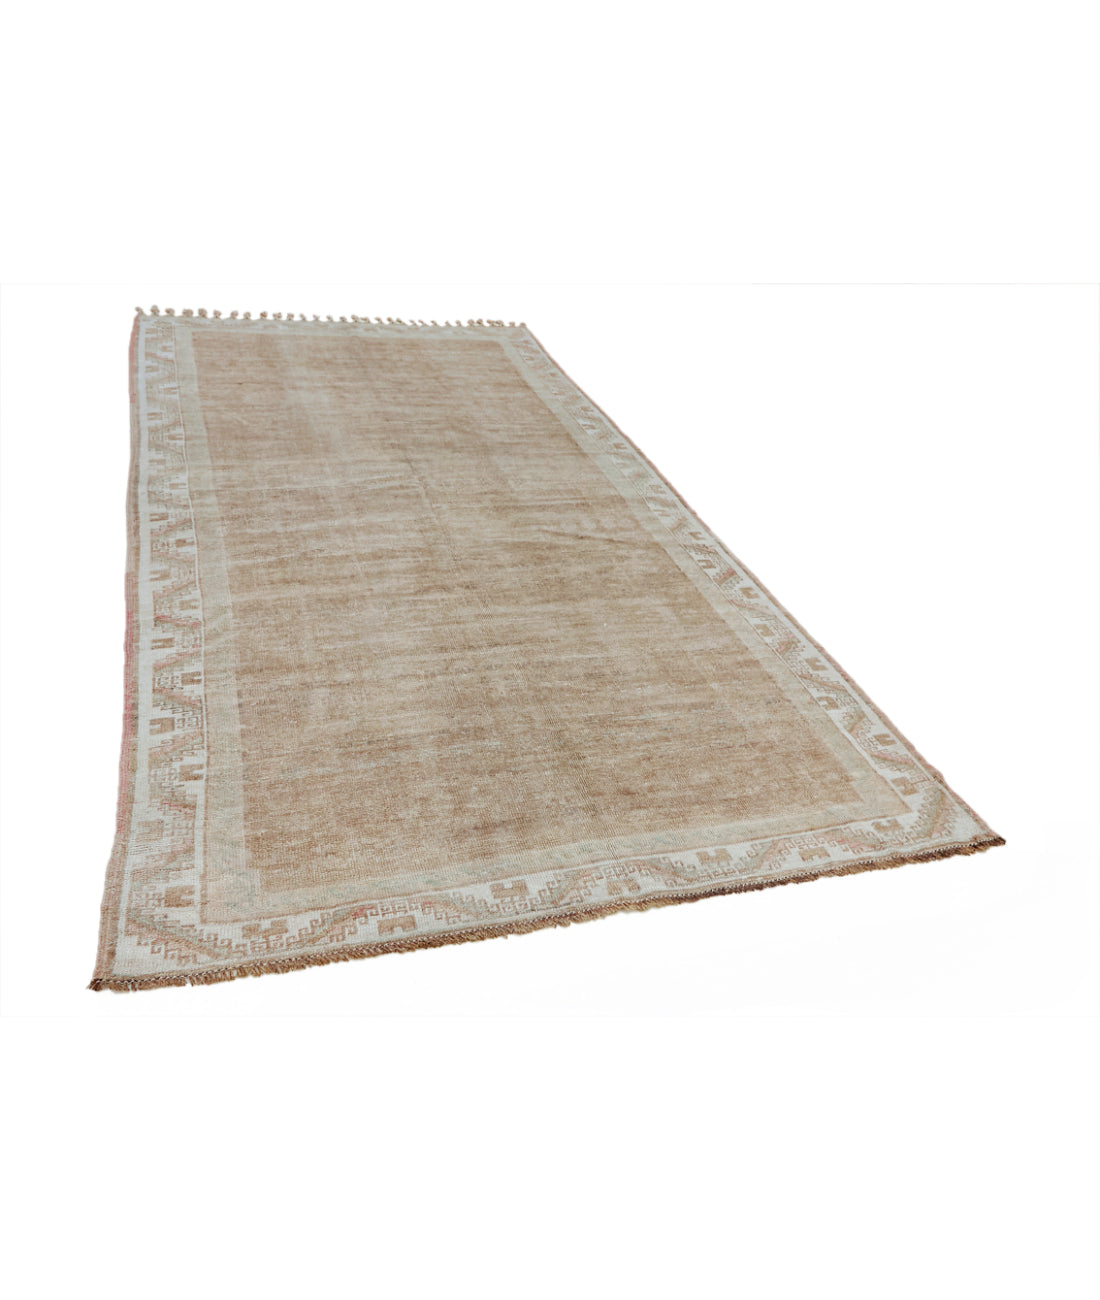 Hand Knotted Turkey Kars Wool Rug 5'9" x 10'8" 5' 9" X 10' 8" (175 X 325) / Taupe / Ivory